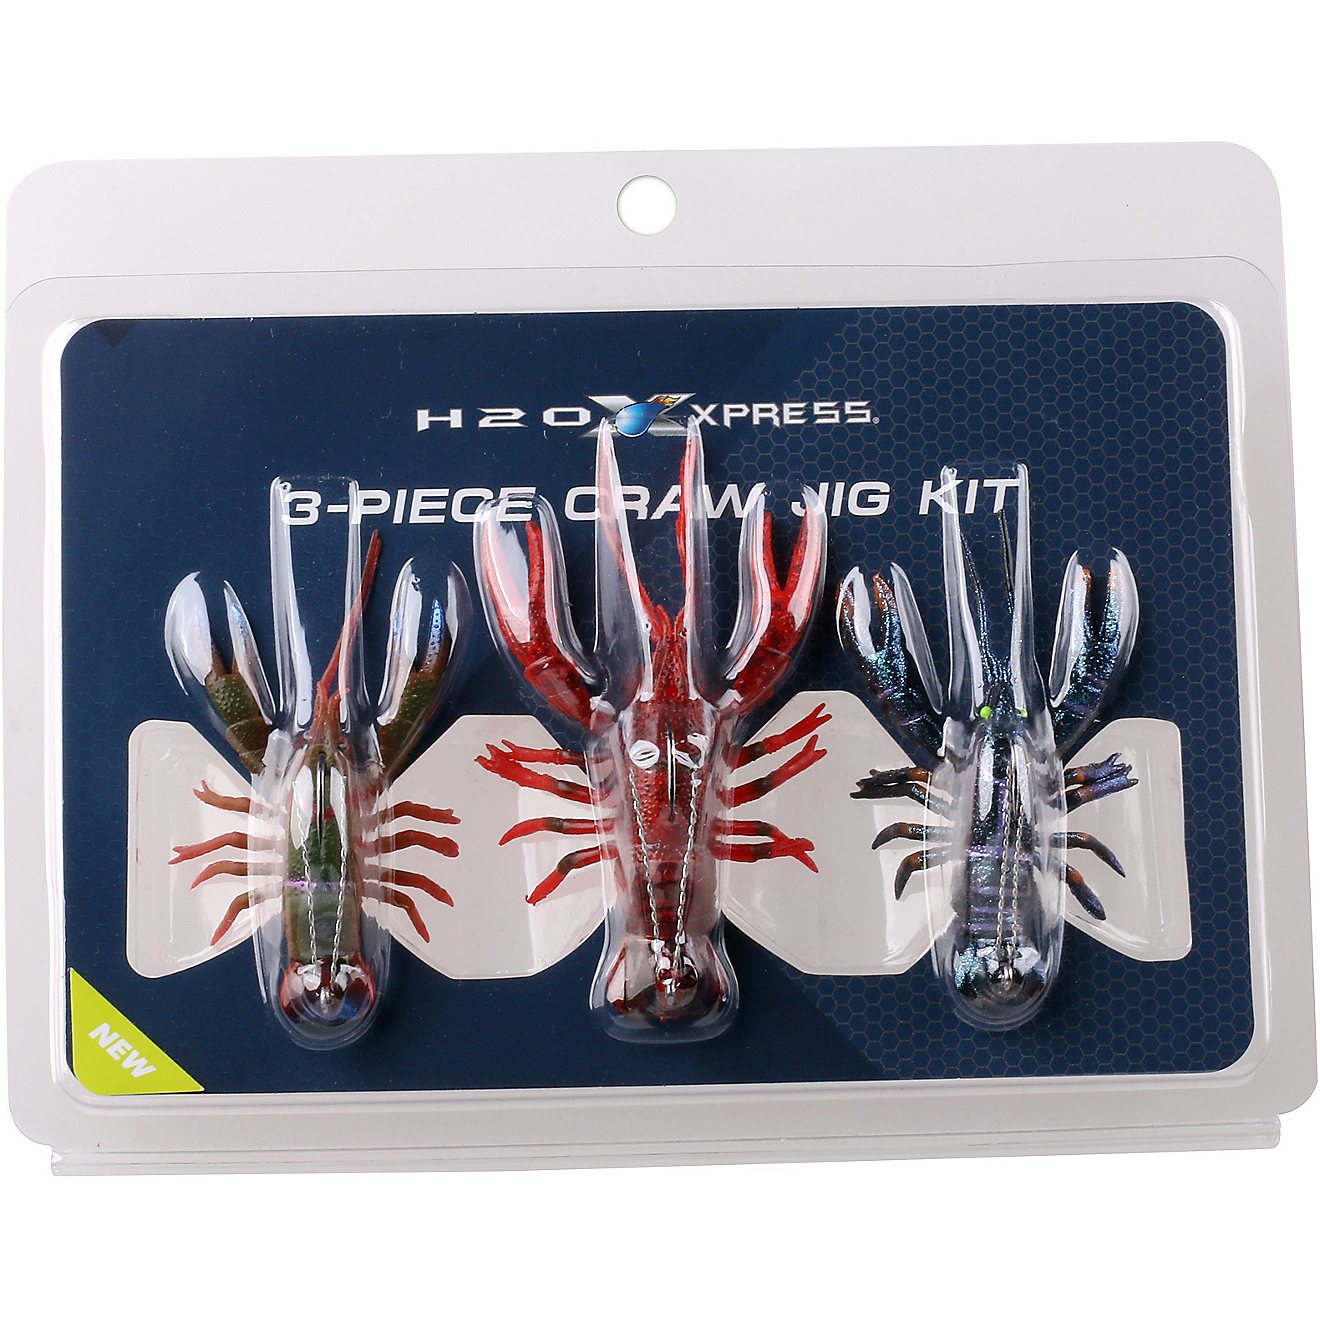 H2O XPRESS Craw Jig Kit 3-Pack                                                                                                   - view number 1